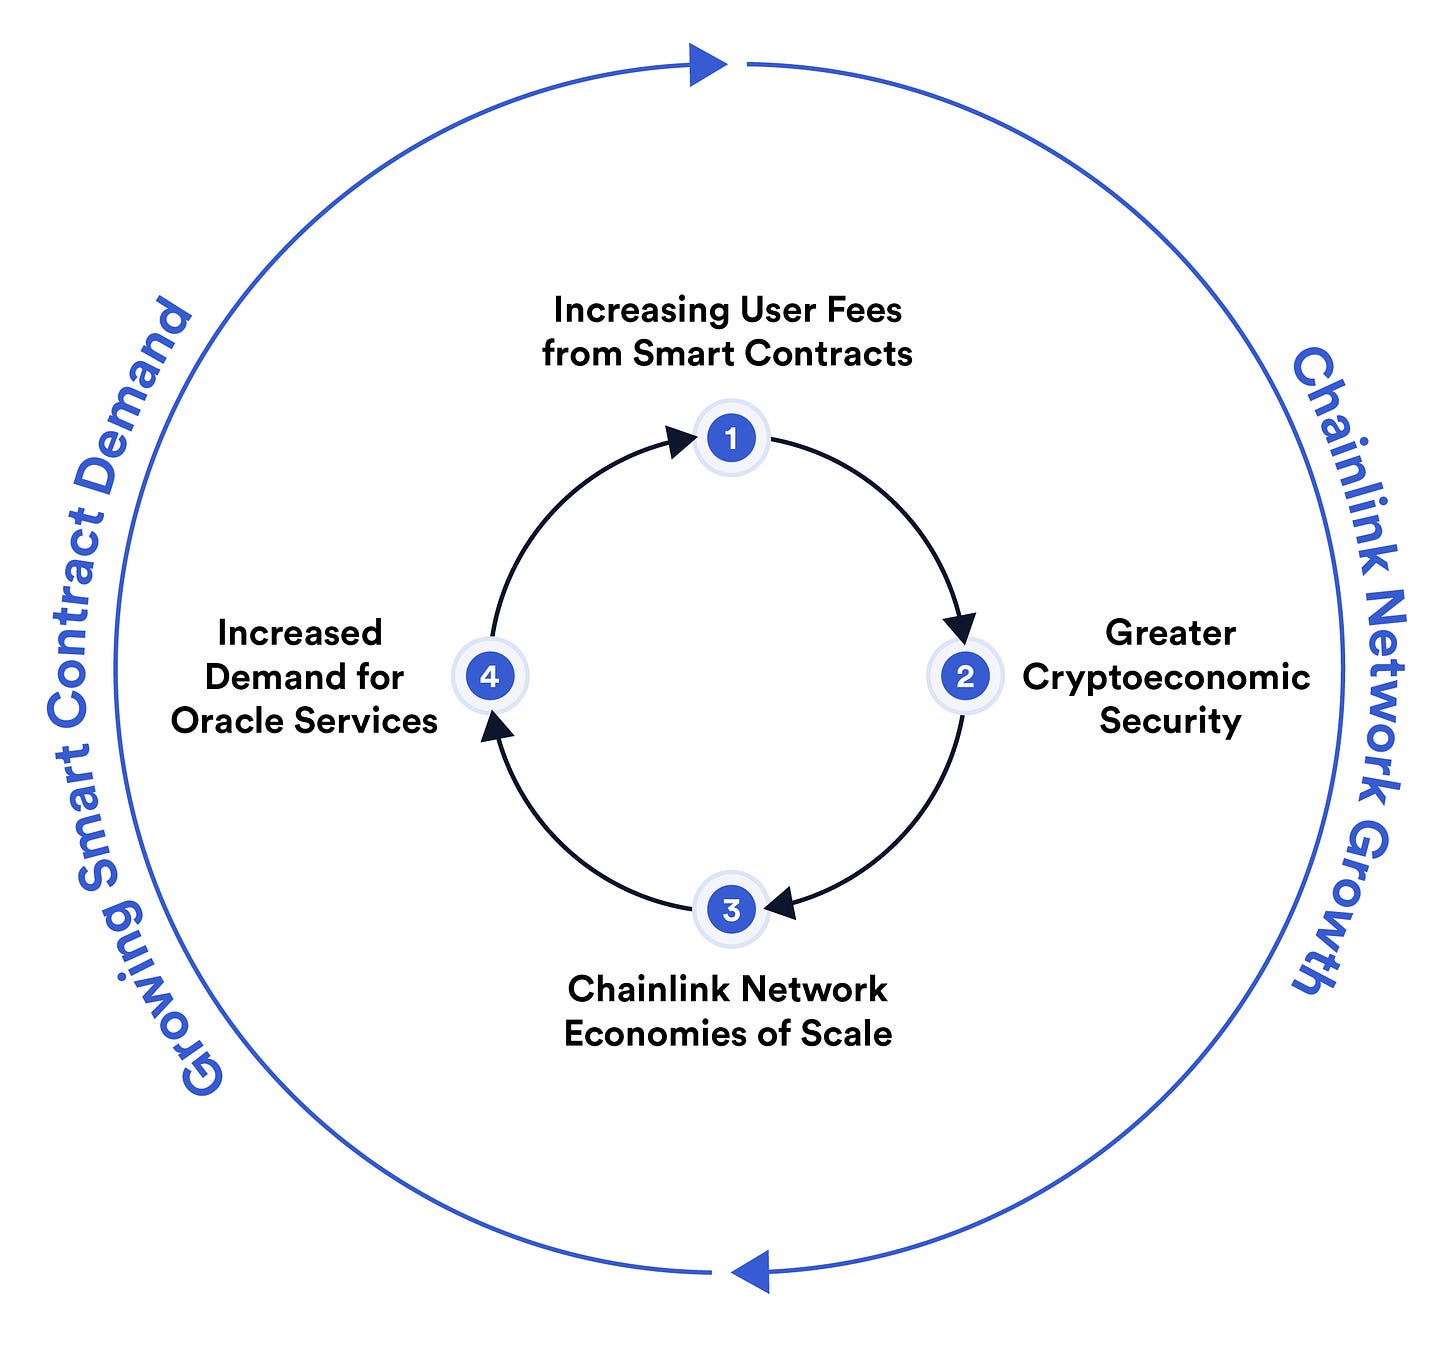 An image showing how the Chainlink Network aims for a virtuous cycle of cryptoeconomic security in which additional user fees incentivize increased node security, which drives more data on-chain.